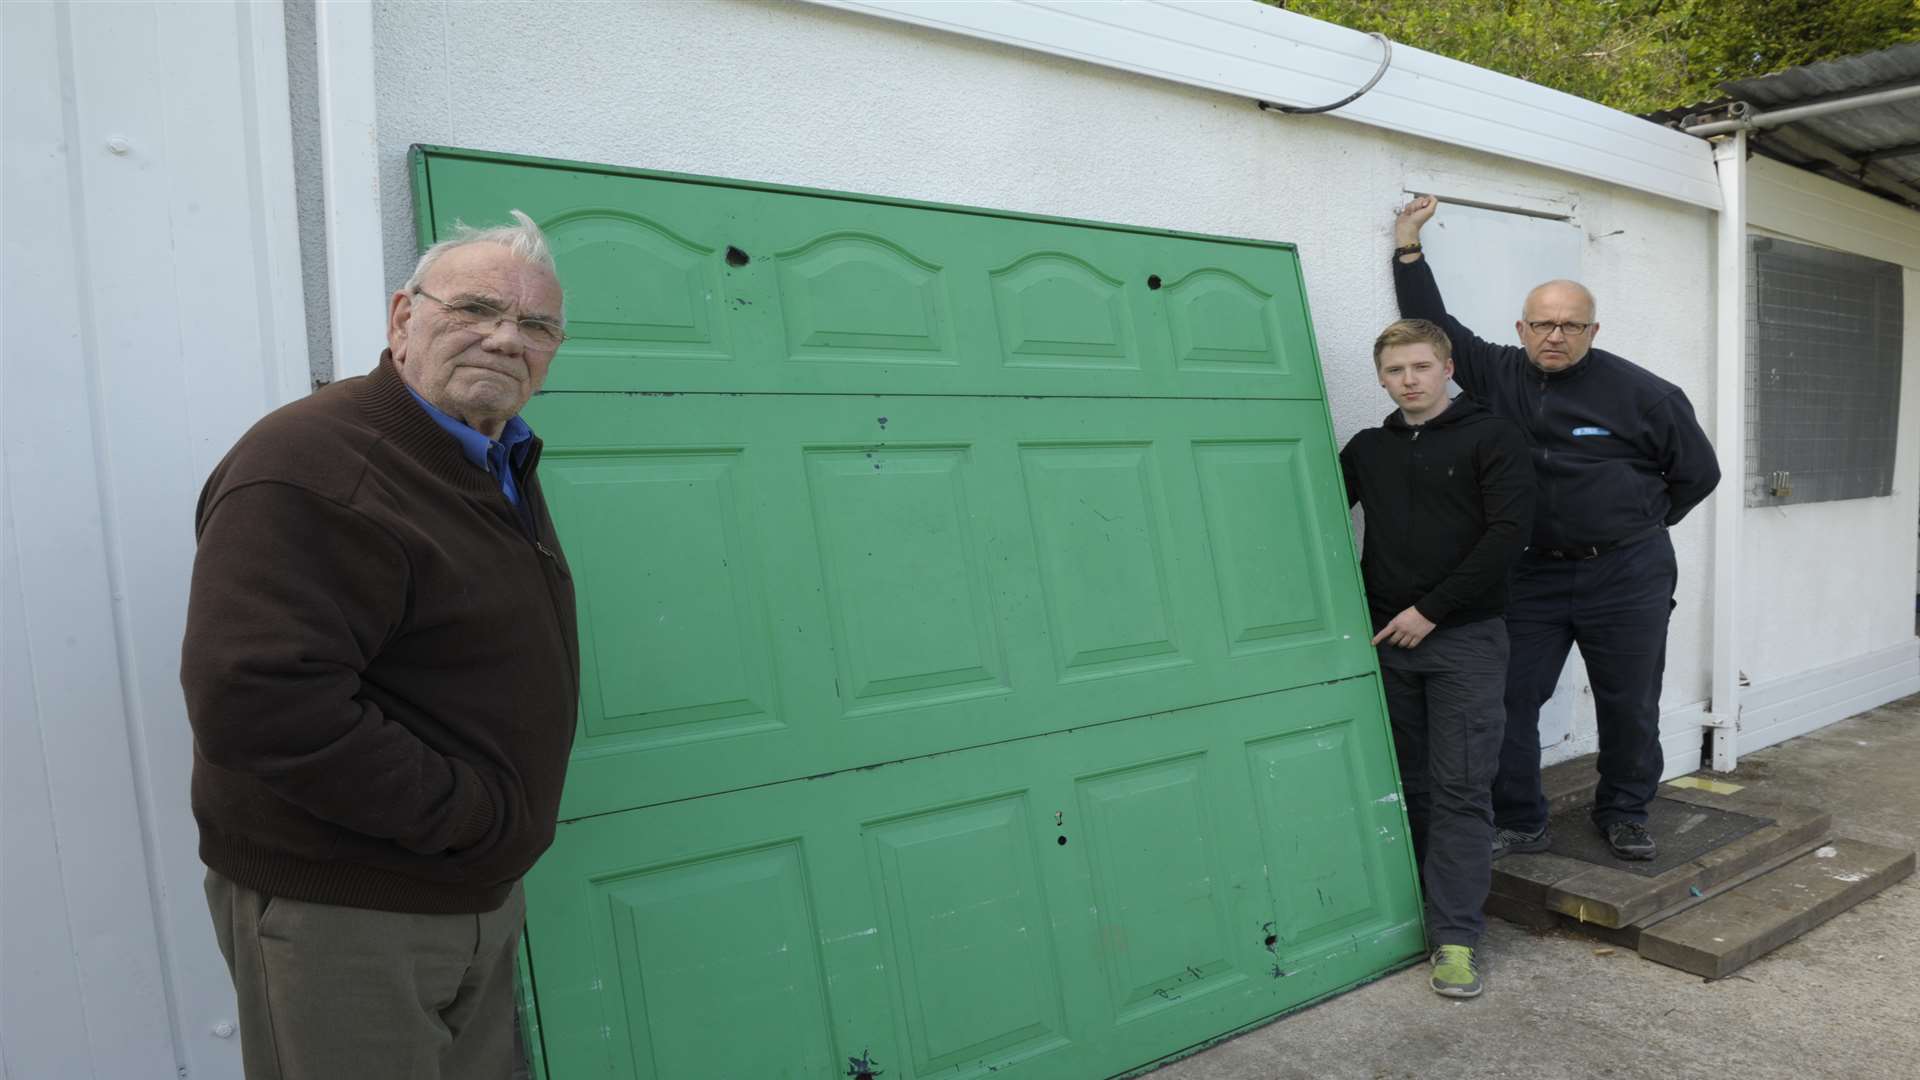 Colin Gardener (Chairman), Mark Ruddy and Richard Cross with the garage door the vandals removed so they could get in.